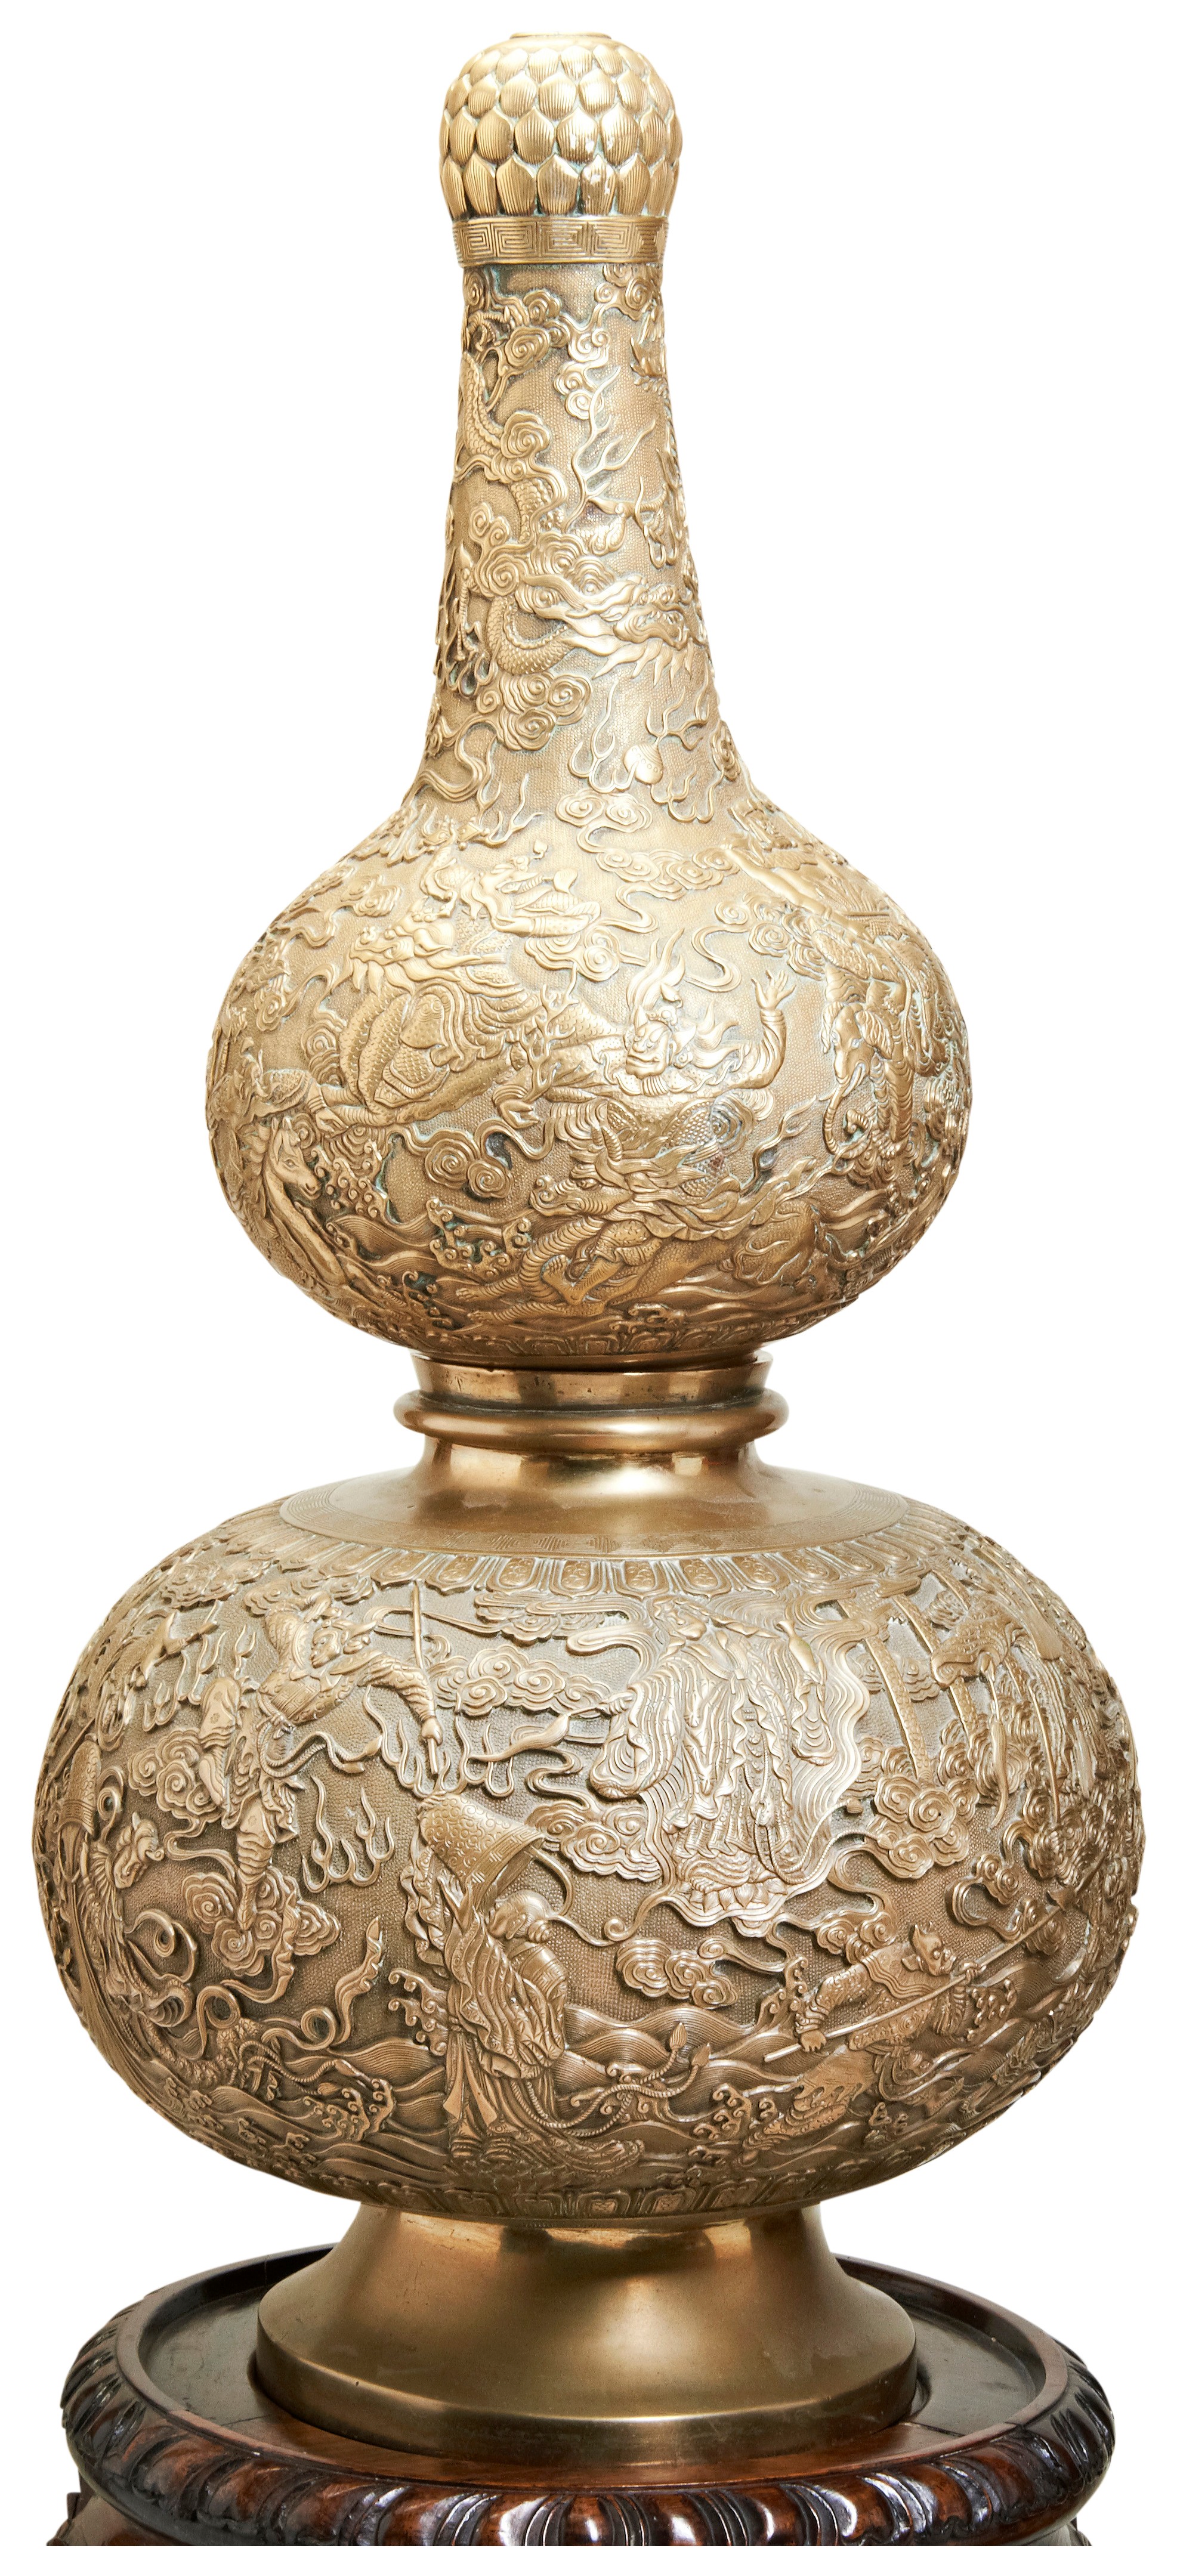 A FINE AND LARGE GILT-BRONZE DOUBLE-GOURD INCENSE BURNER  QING DYNASTY, 18TH / 19TH CENTURY 清 - Bild 3 aus 5